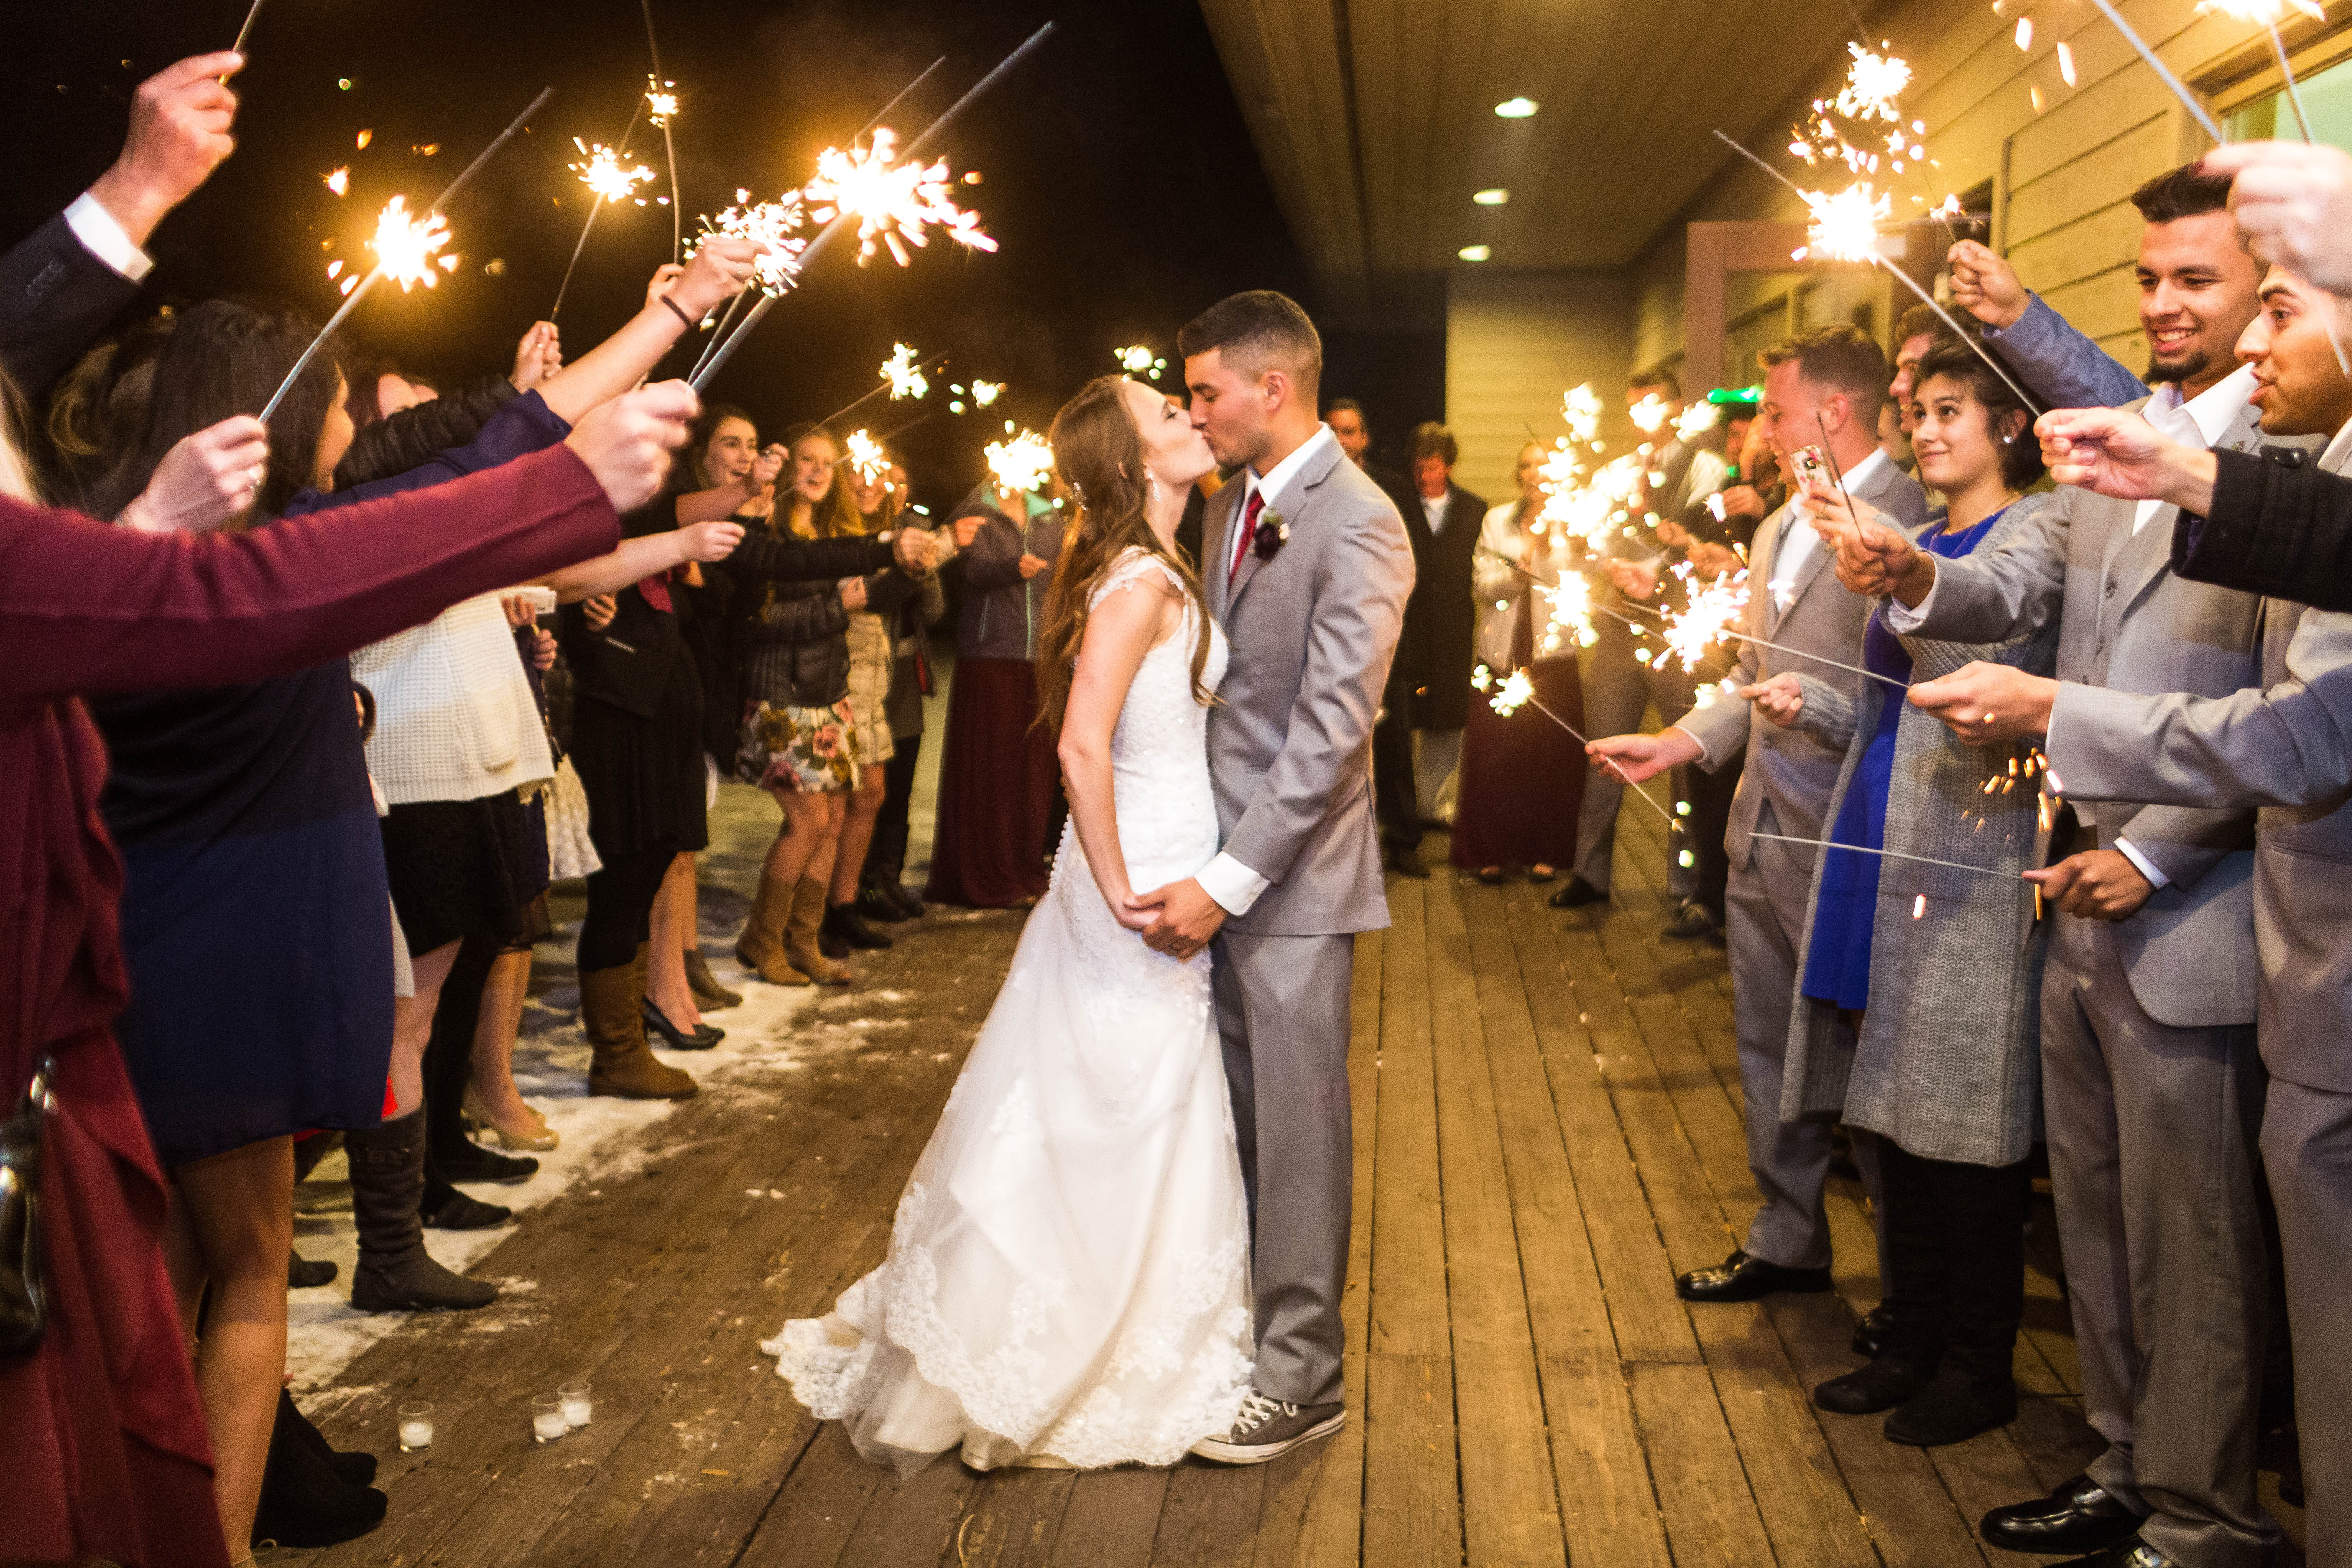 Bride and groom kiss while surrounded by friends and family with sparklers